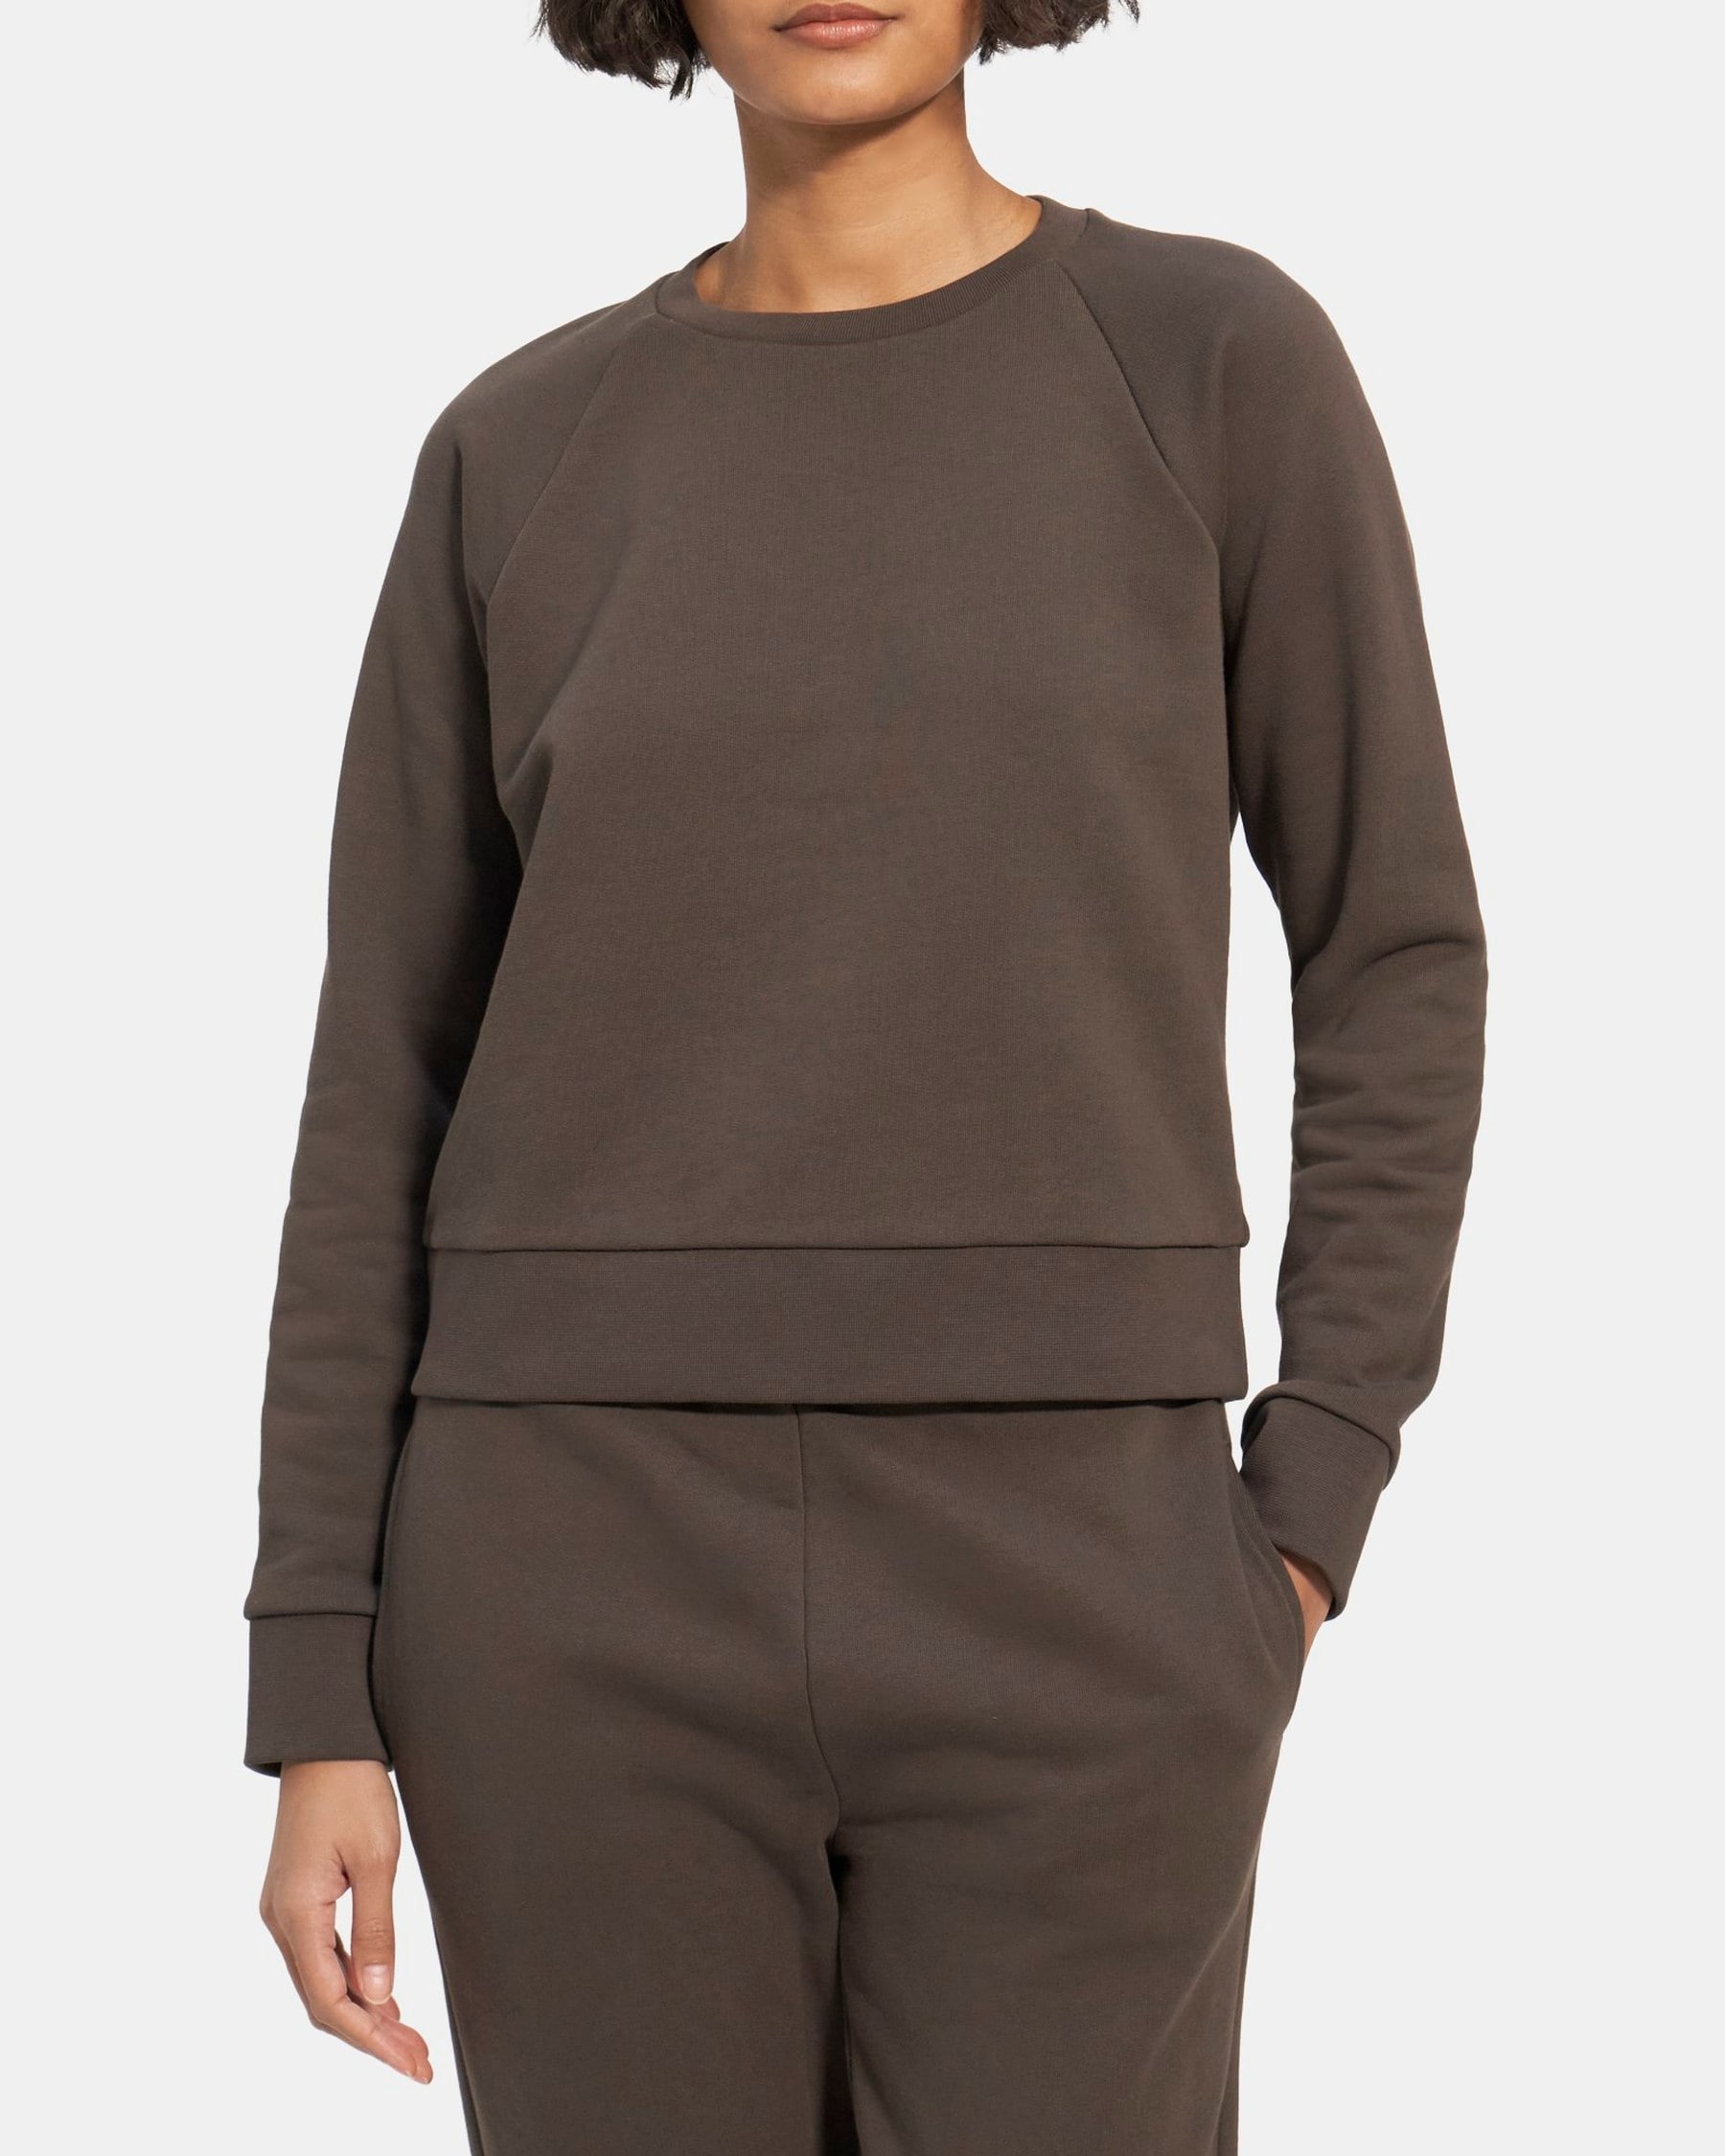 Cropped Sweatshirt in Terry Cotton